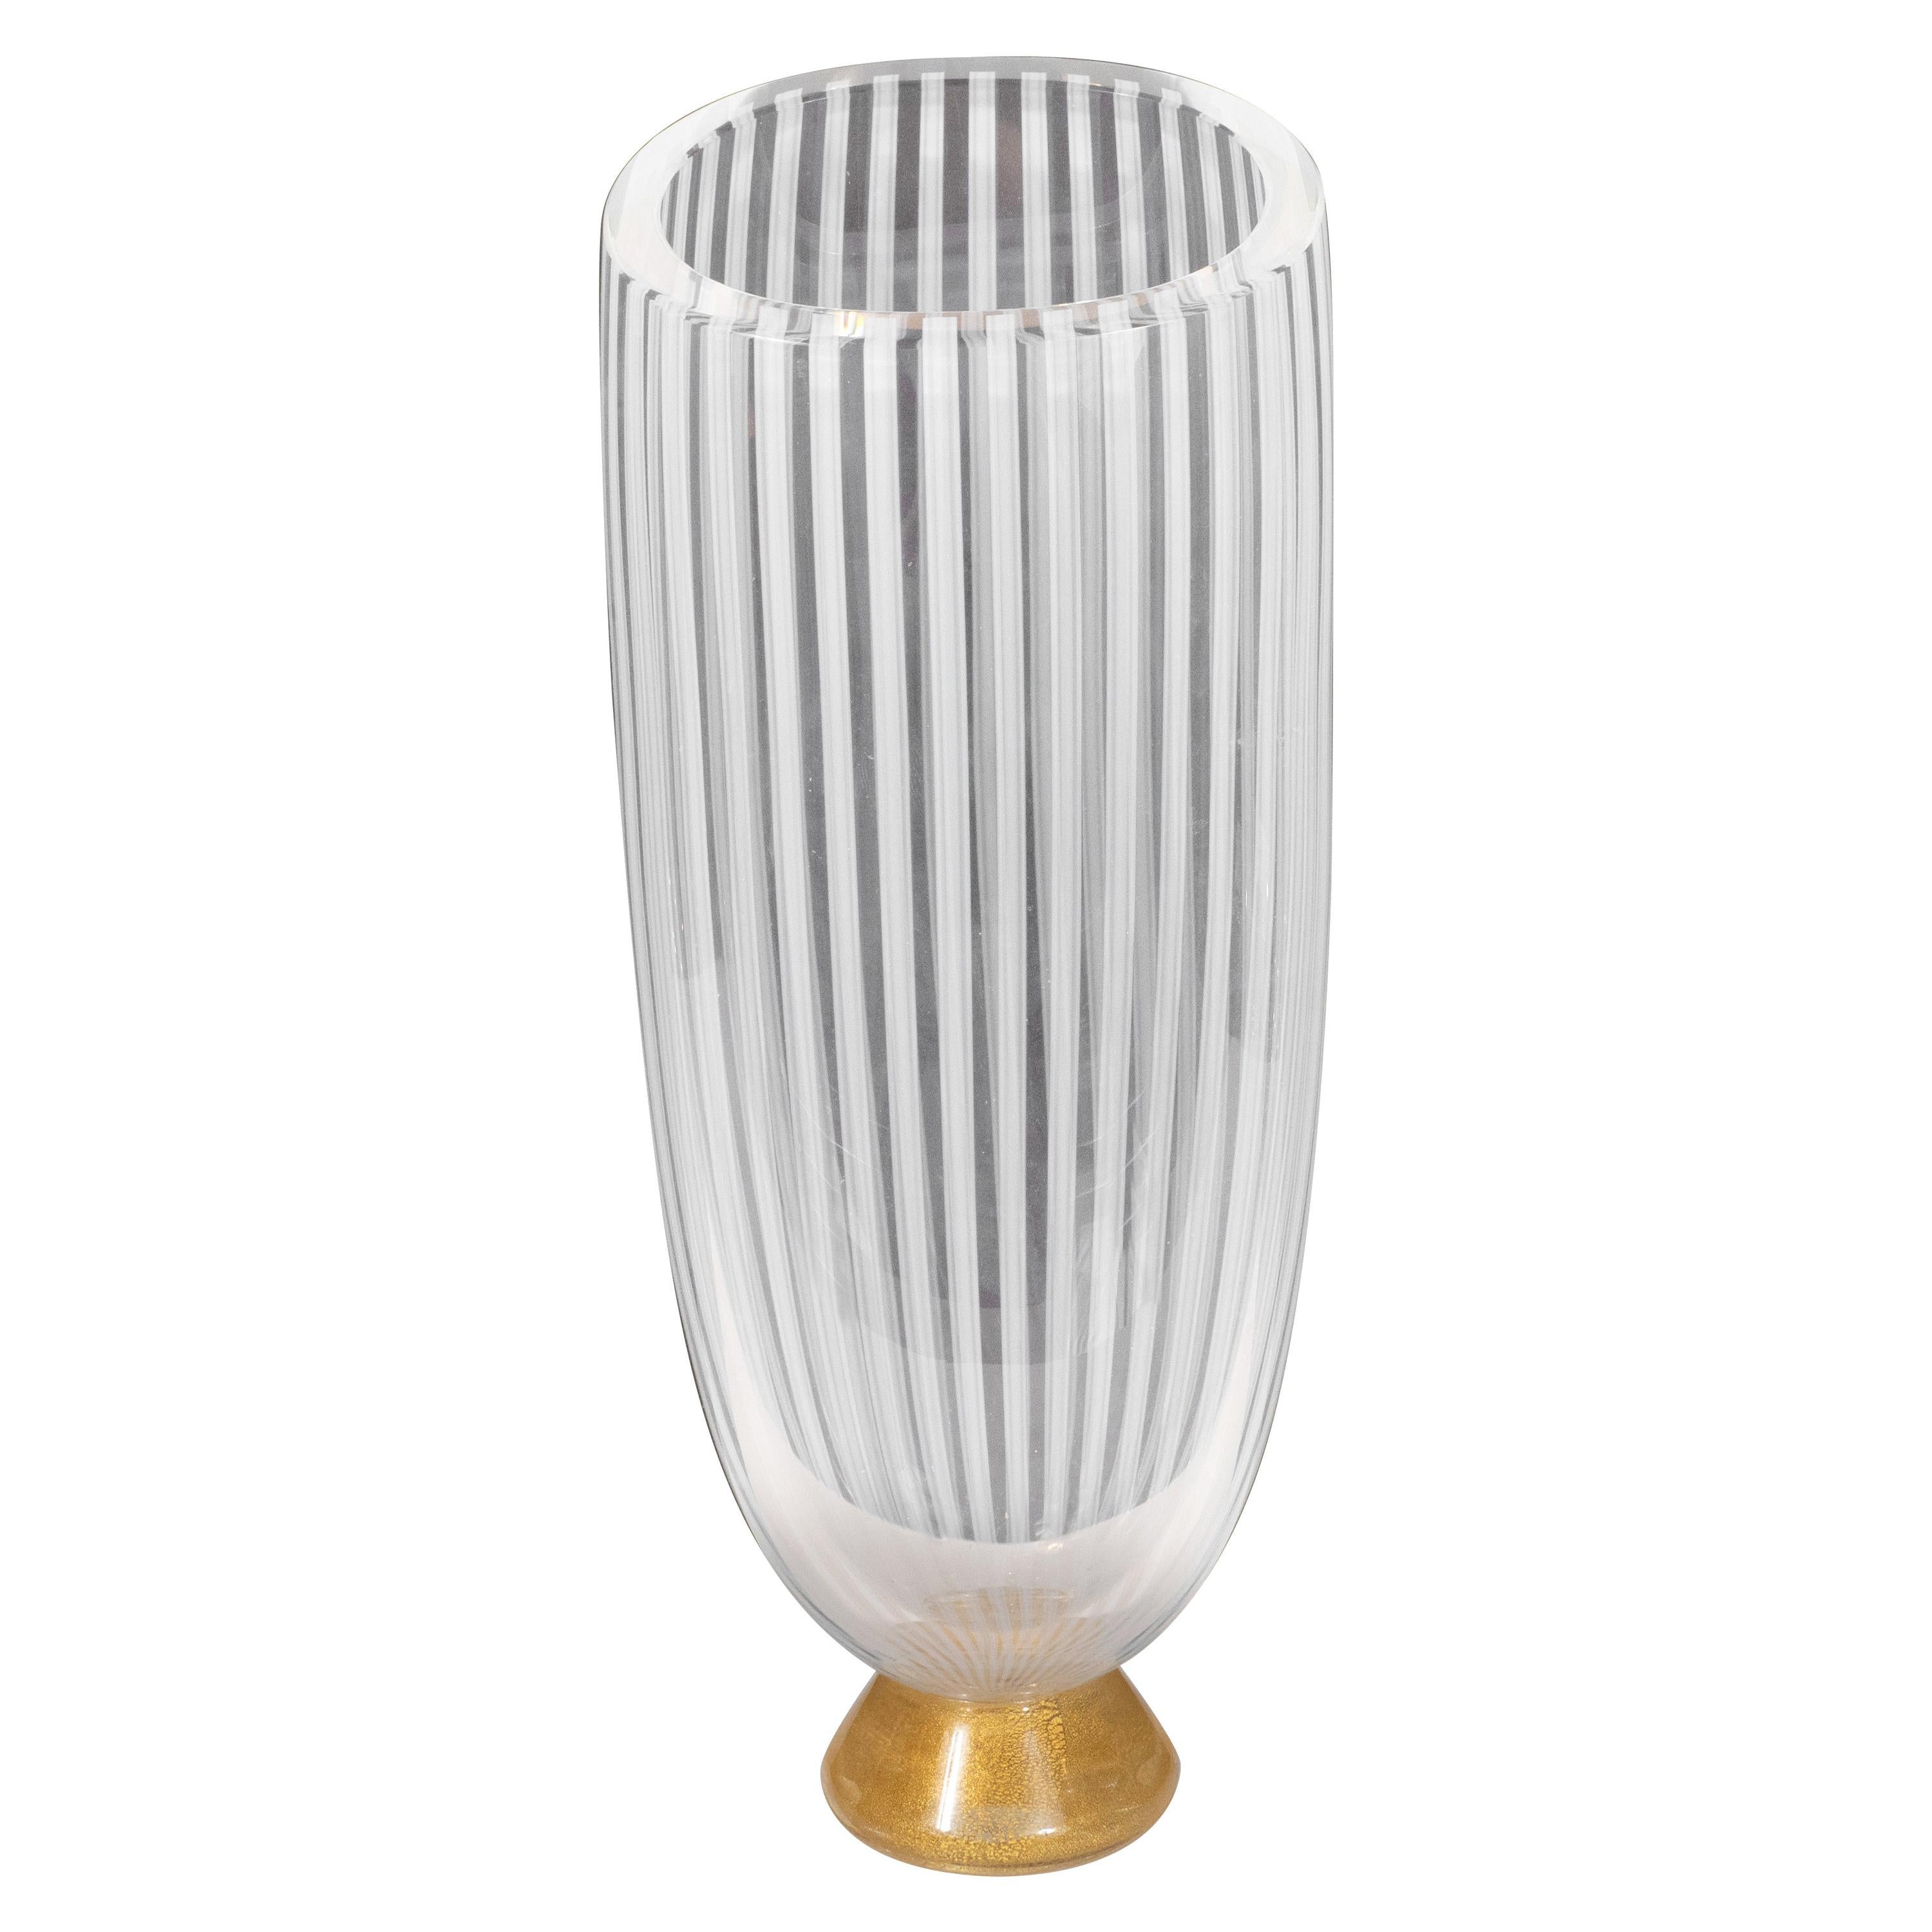 Midcentury Hand Blown Murano Striated Glass Vase with 24kt Gold Flecks by Seguso